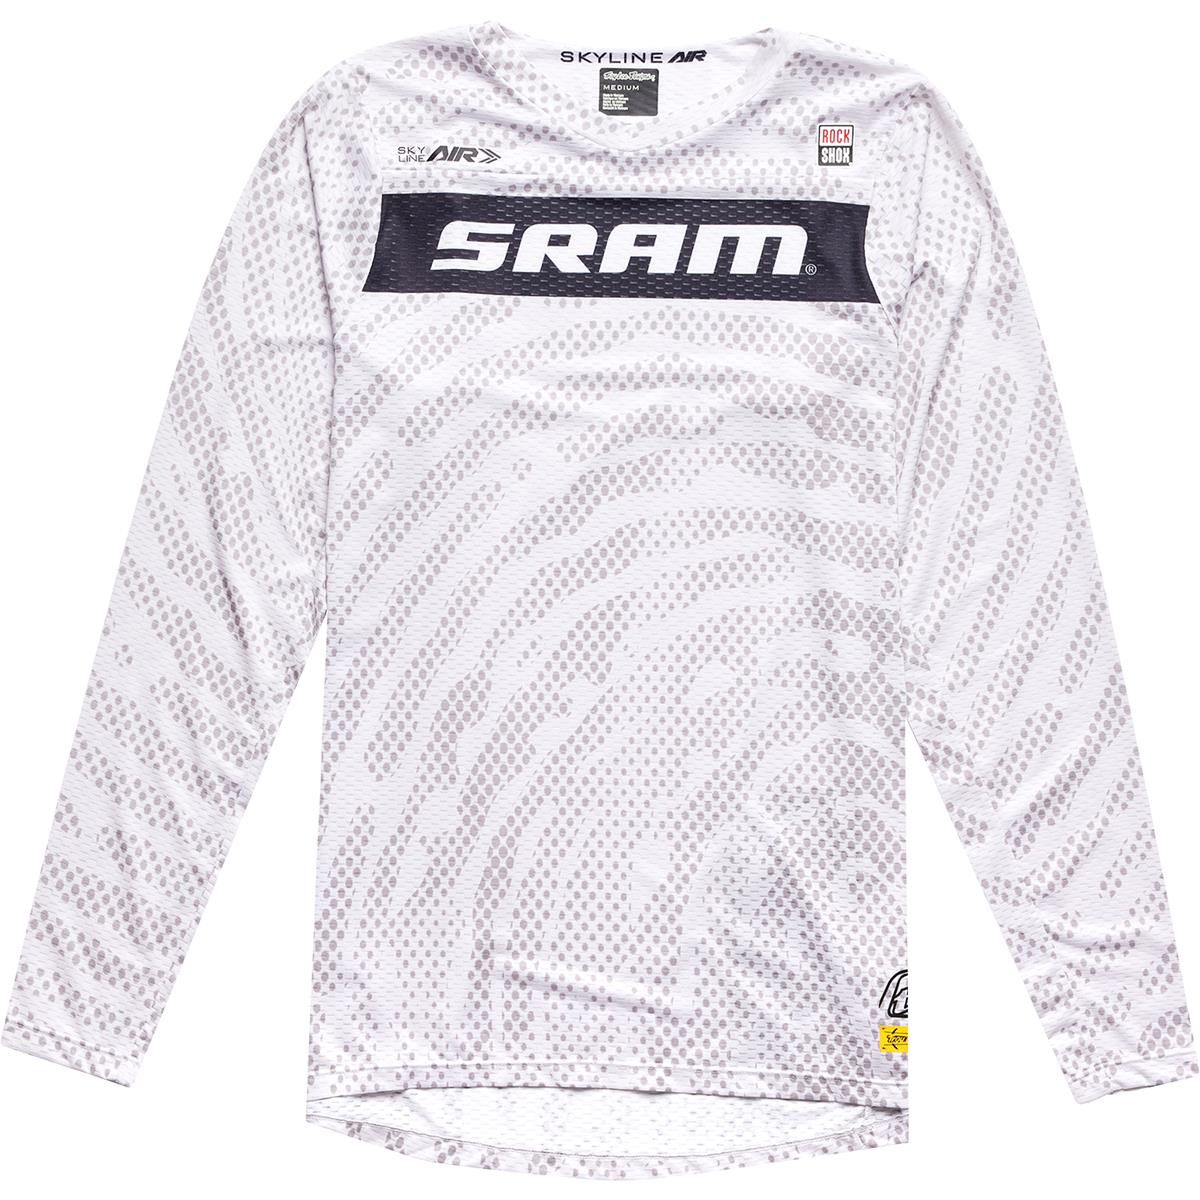 Troy Lee Designs MTB Jersey Long Sleeve Skyline Air Sram - Roots Cement